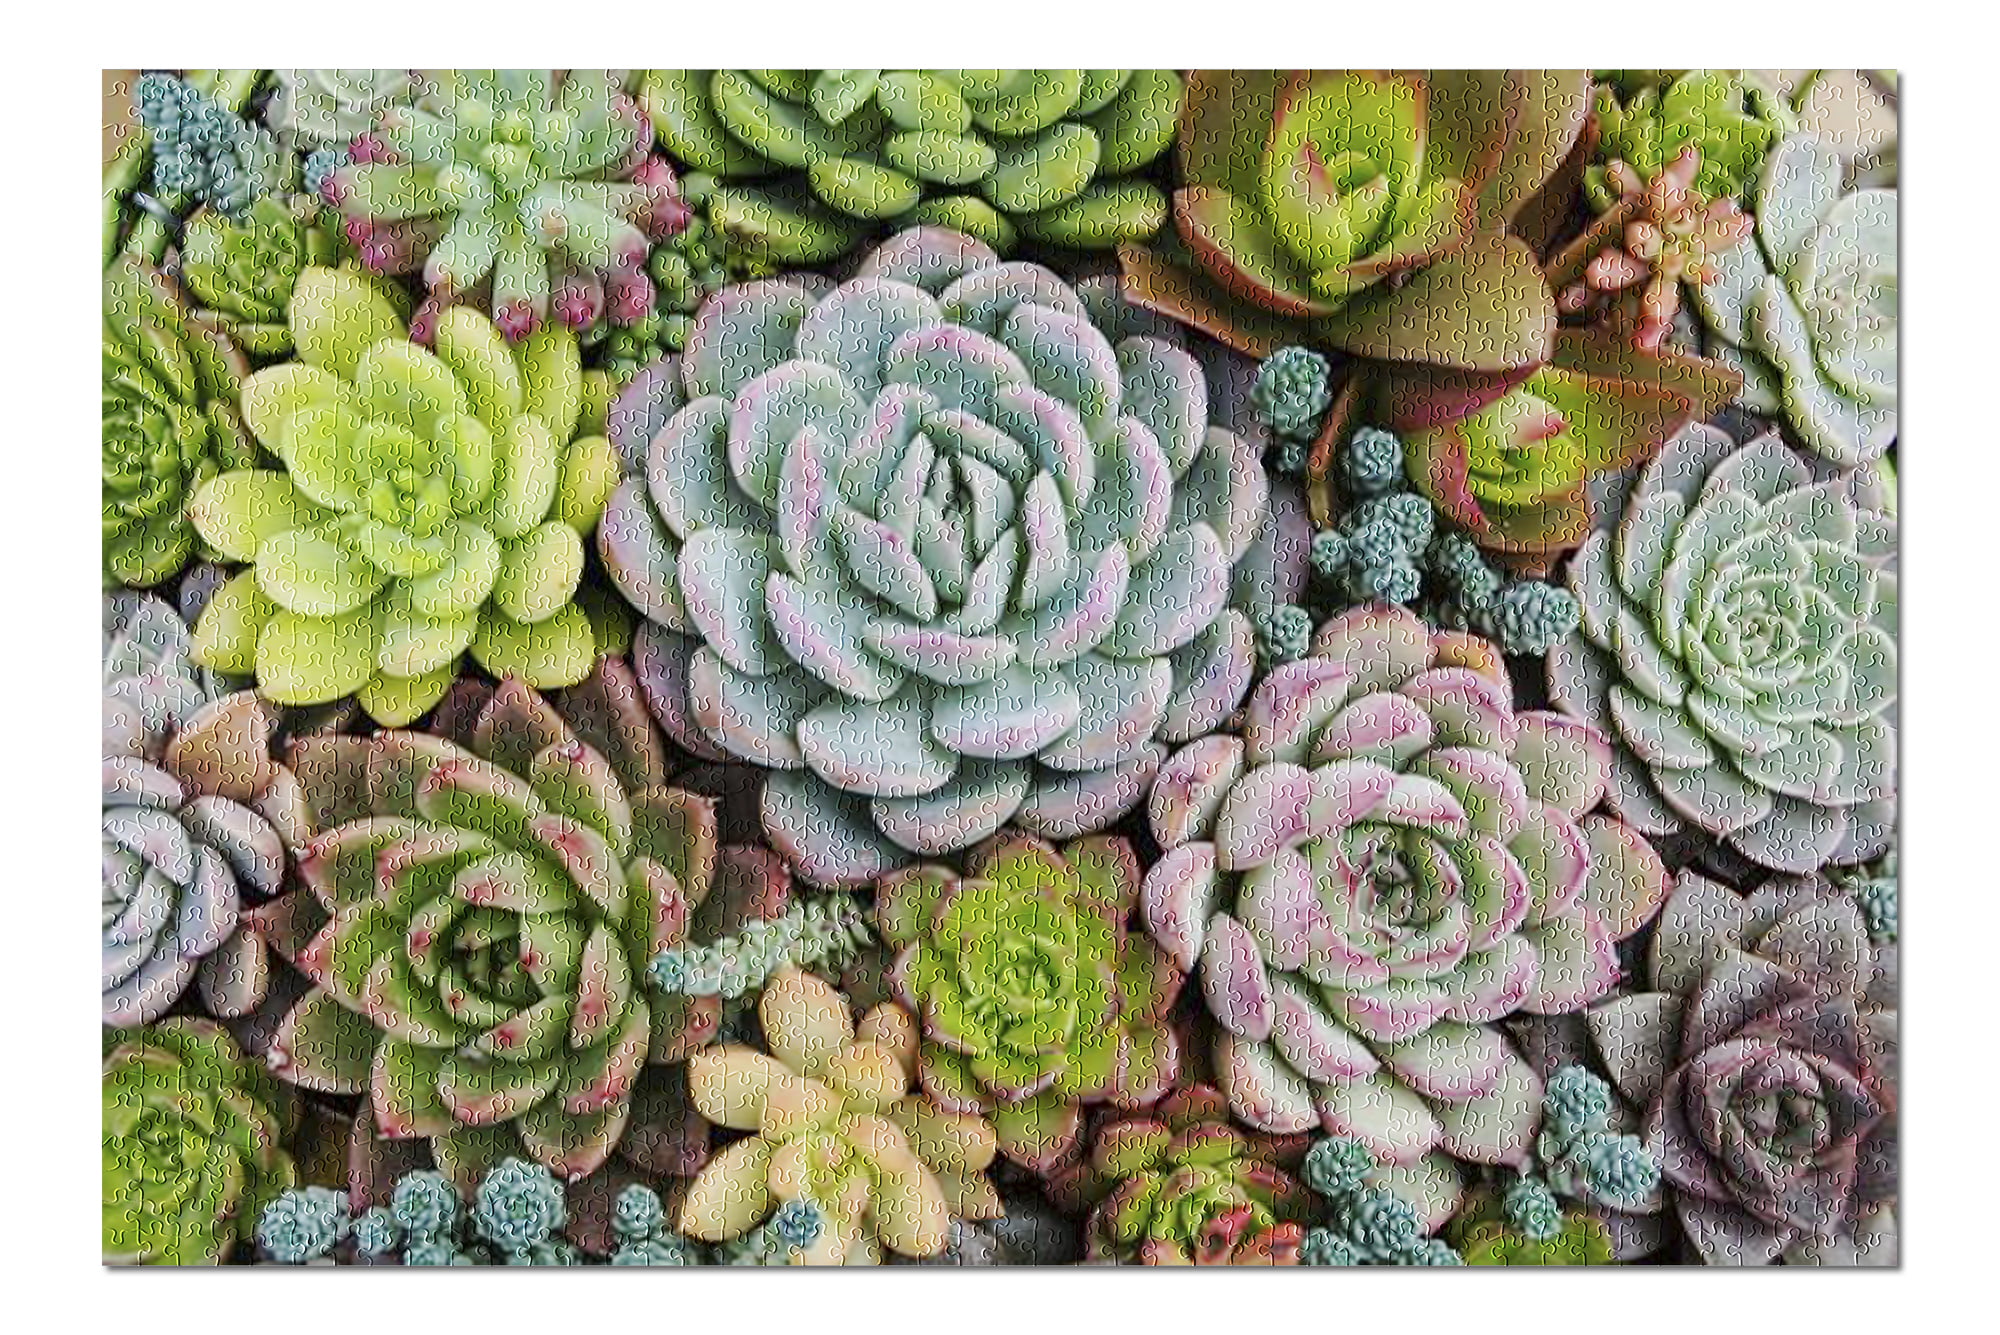 Succulent Plants Puzzle Wooden Jigsaw Puzzle 500 1000 Piece for Adult Teen Kid